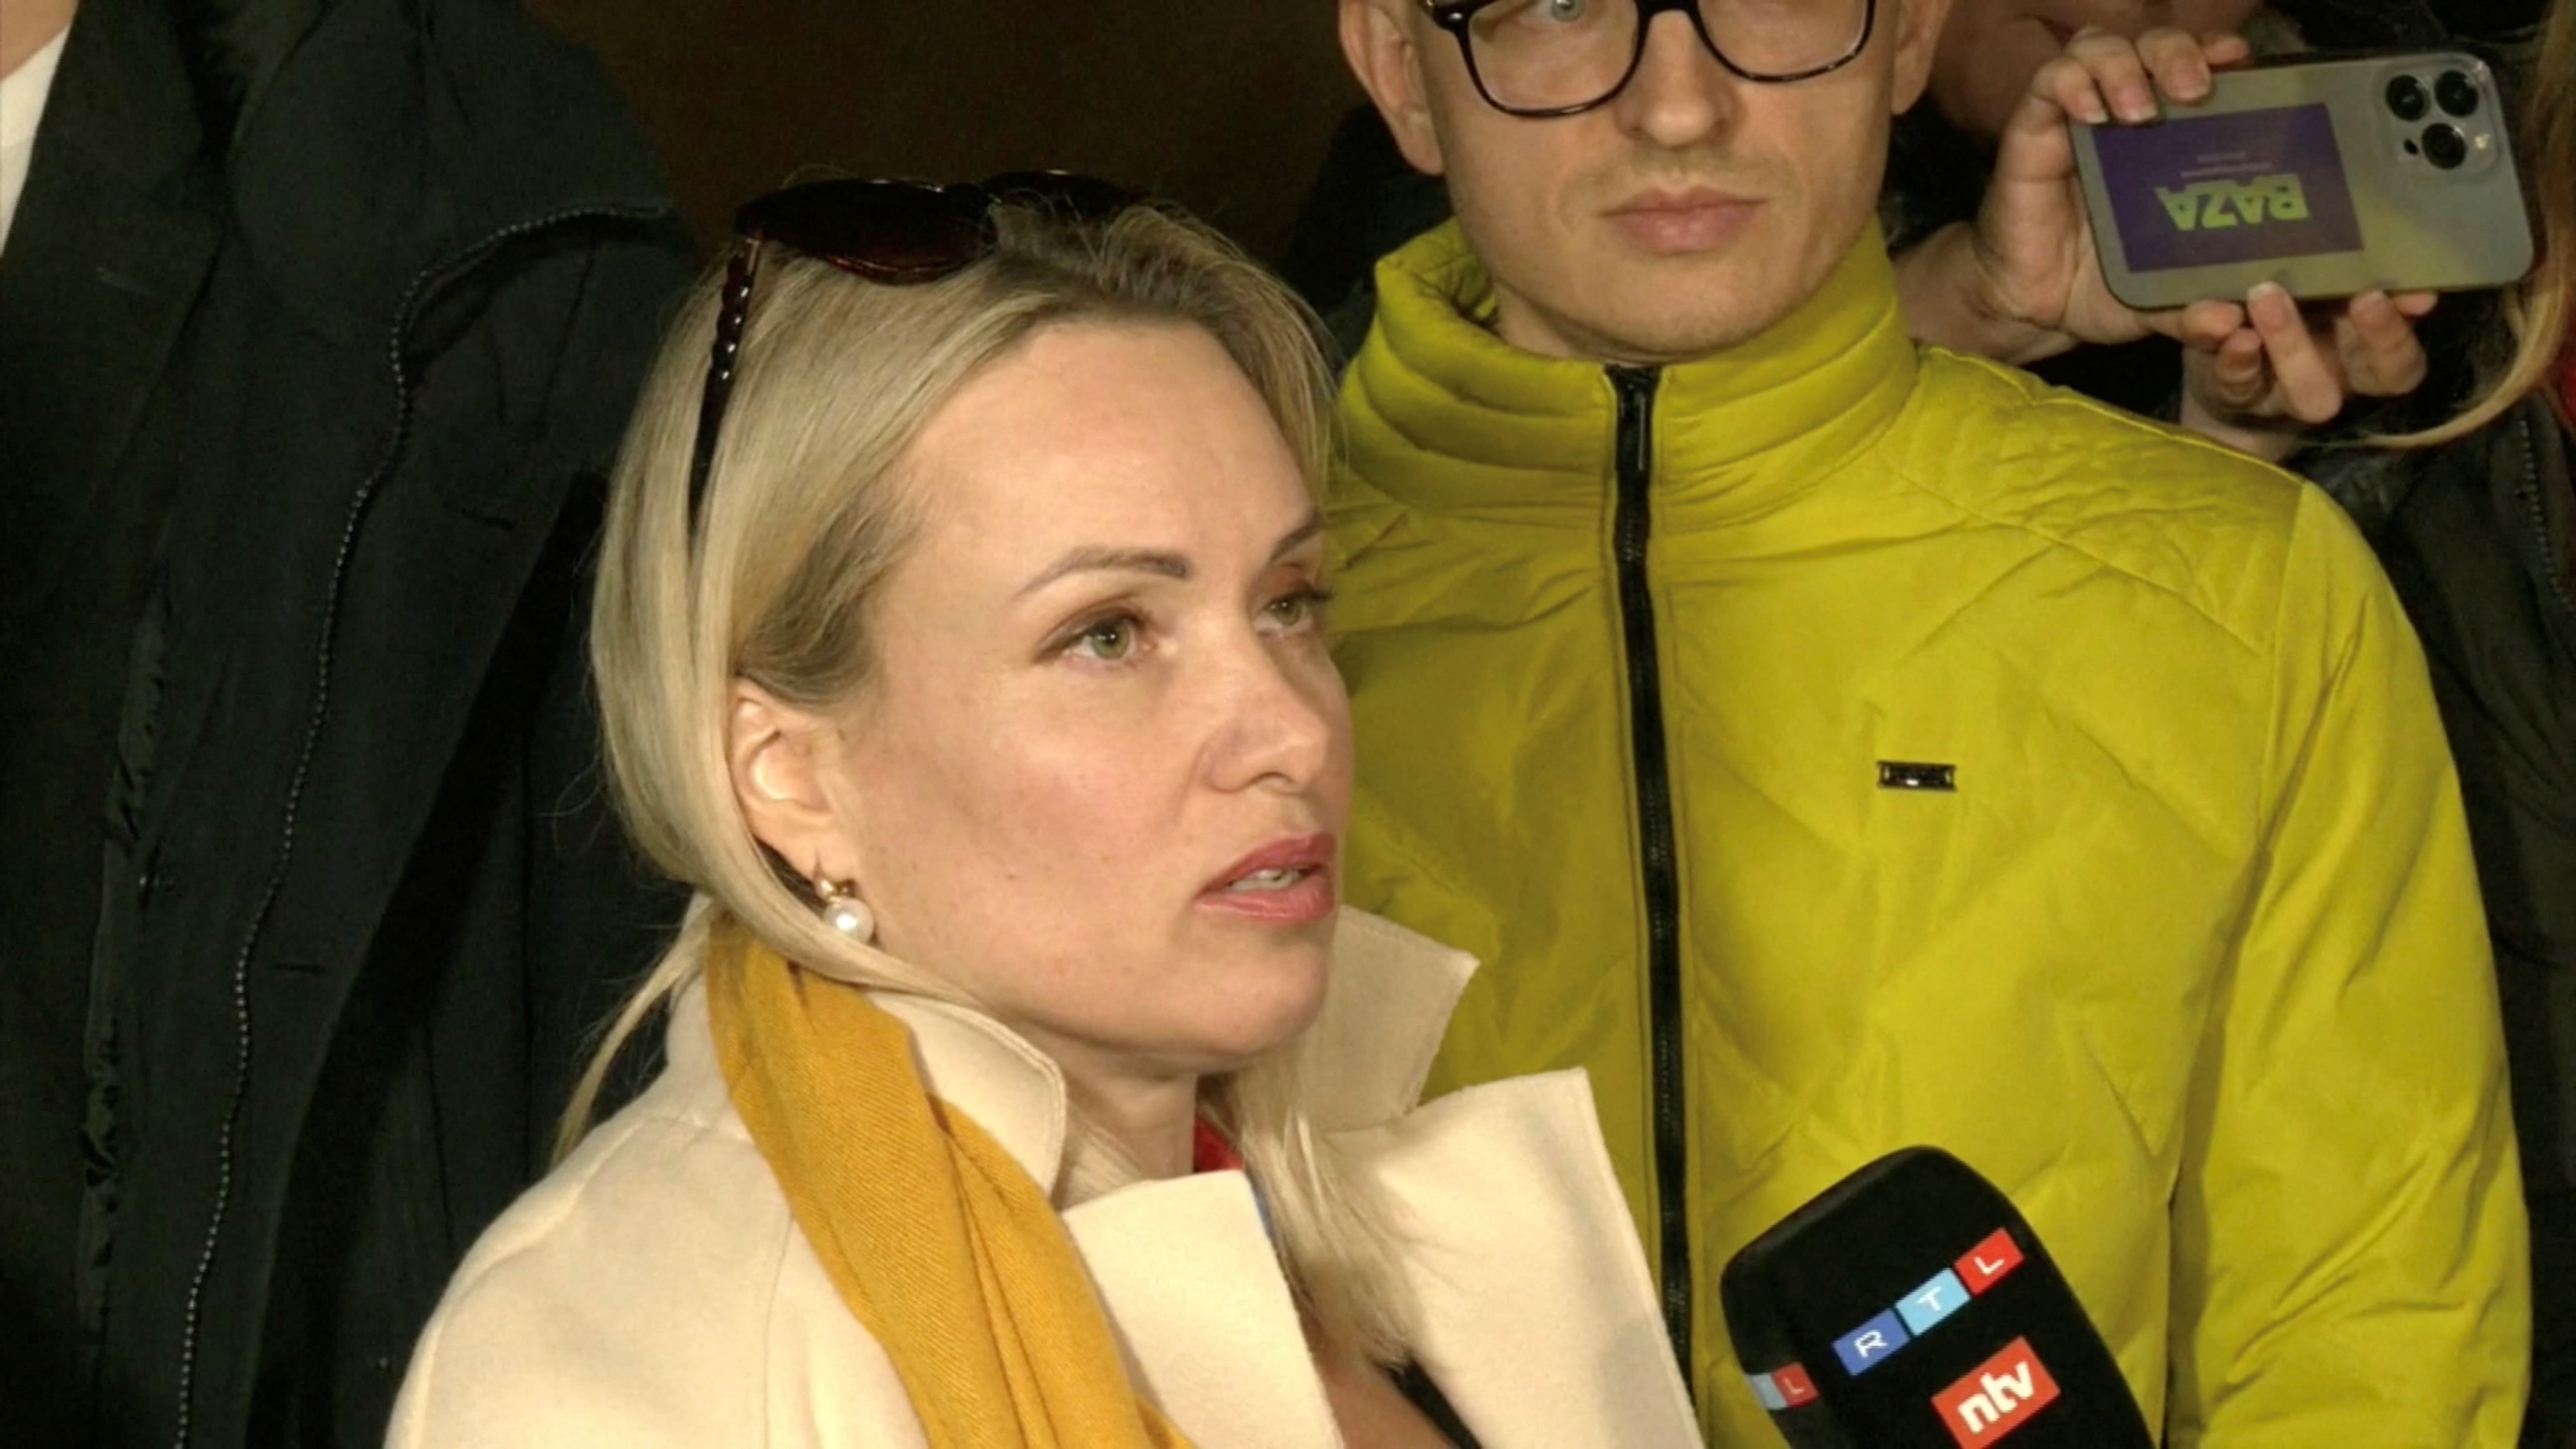 Ms Marina Ovsyannikova, a Channel One employee who staged an on-air protest as she held up an anti-war sign behind a studio presenter, speaks to the media as the leaves the court building in Moscow, Russia on March 15, 2022. 
